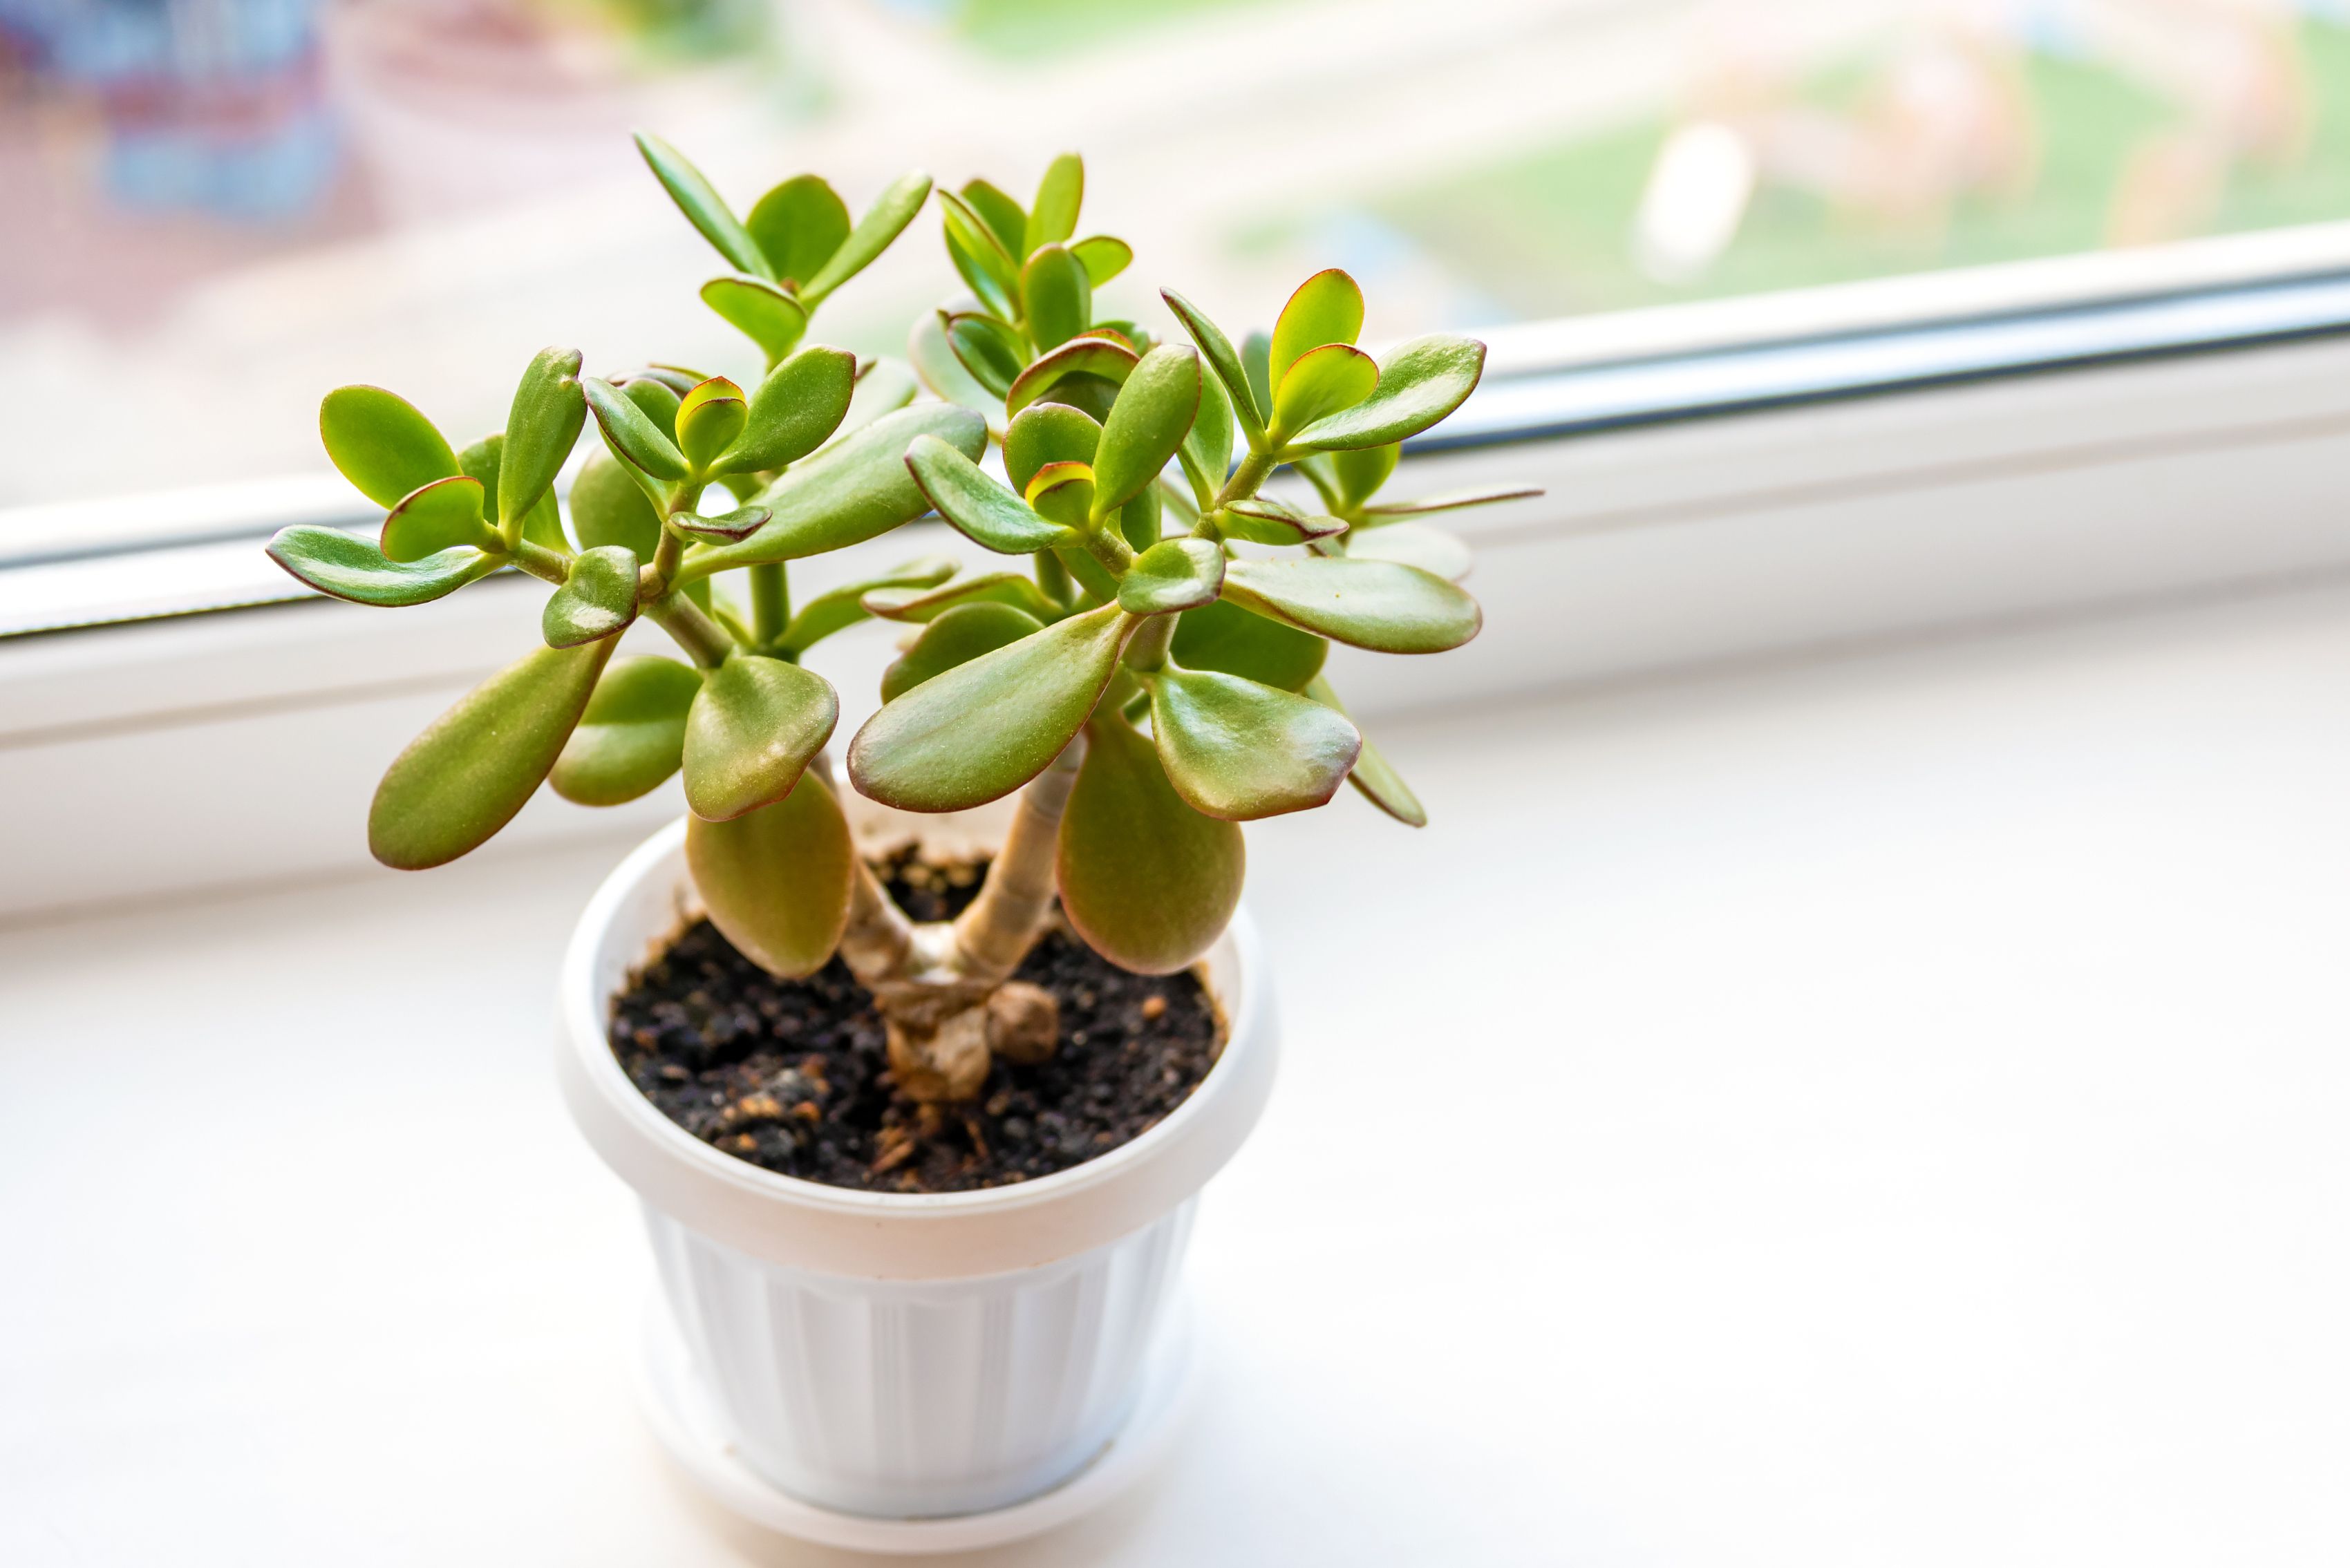 How To Care For Jade Plants - Jade Plant Care Tips